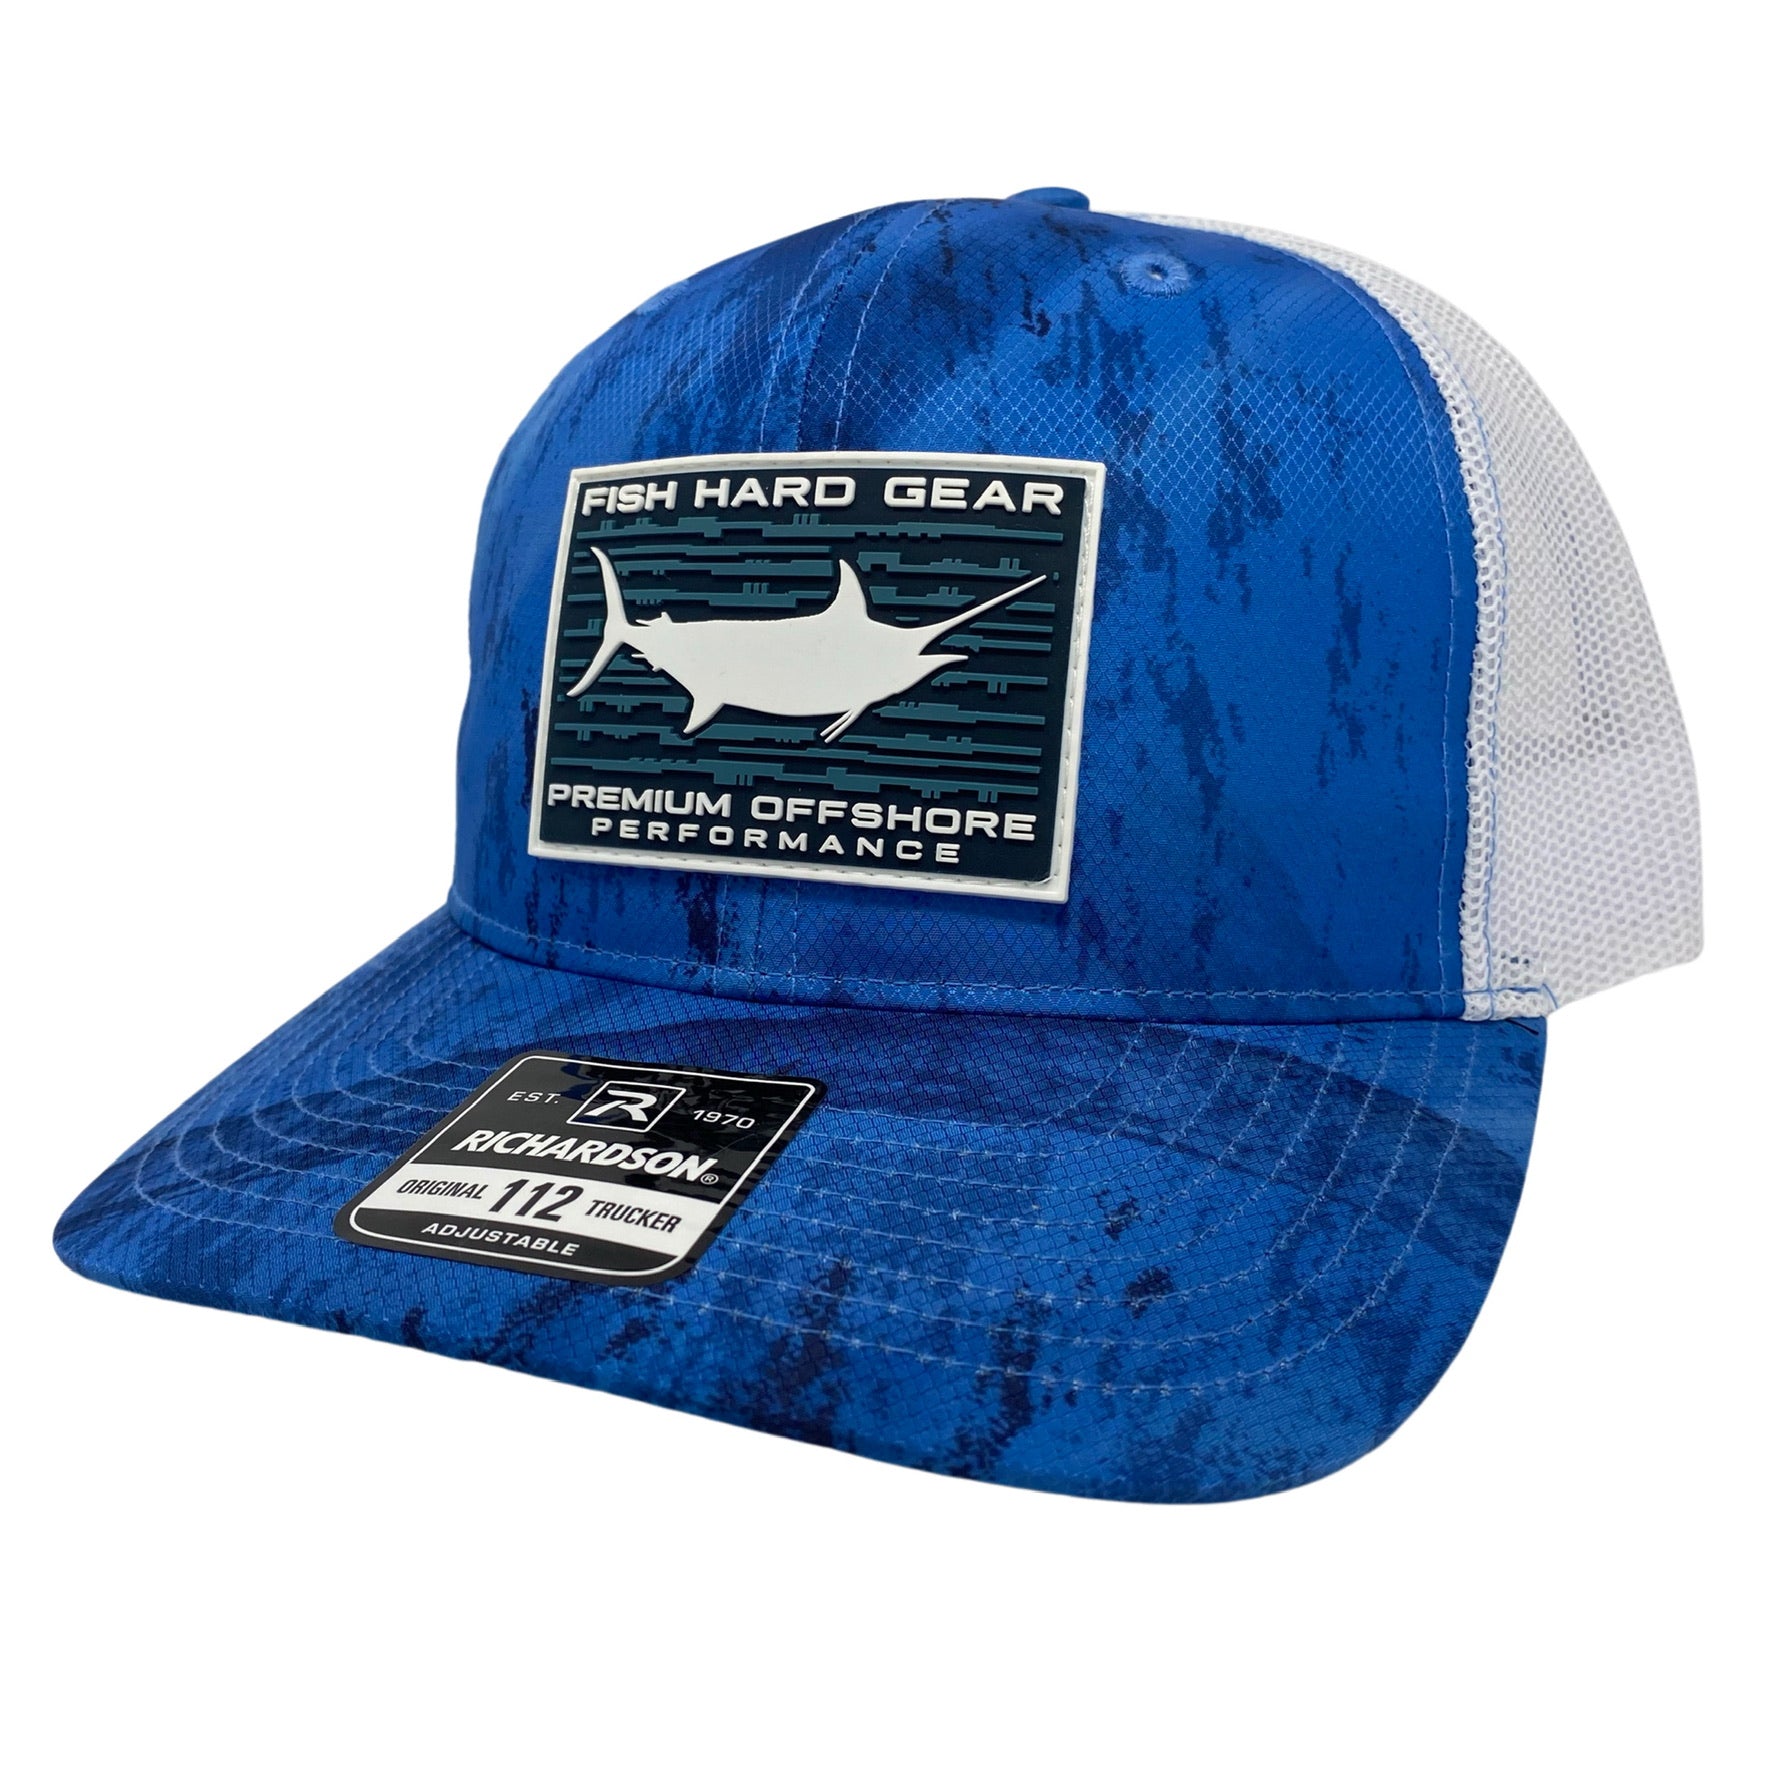 Fishing Richardson 112 Trucker Hat With Patch 